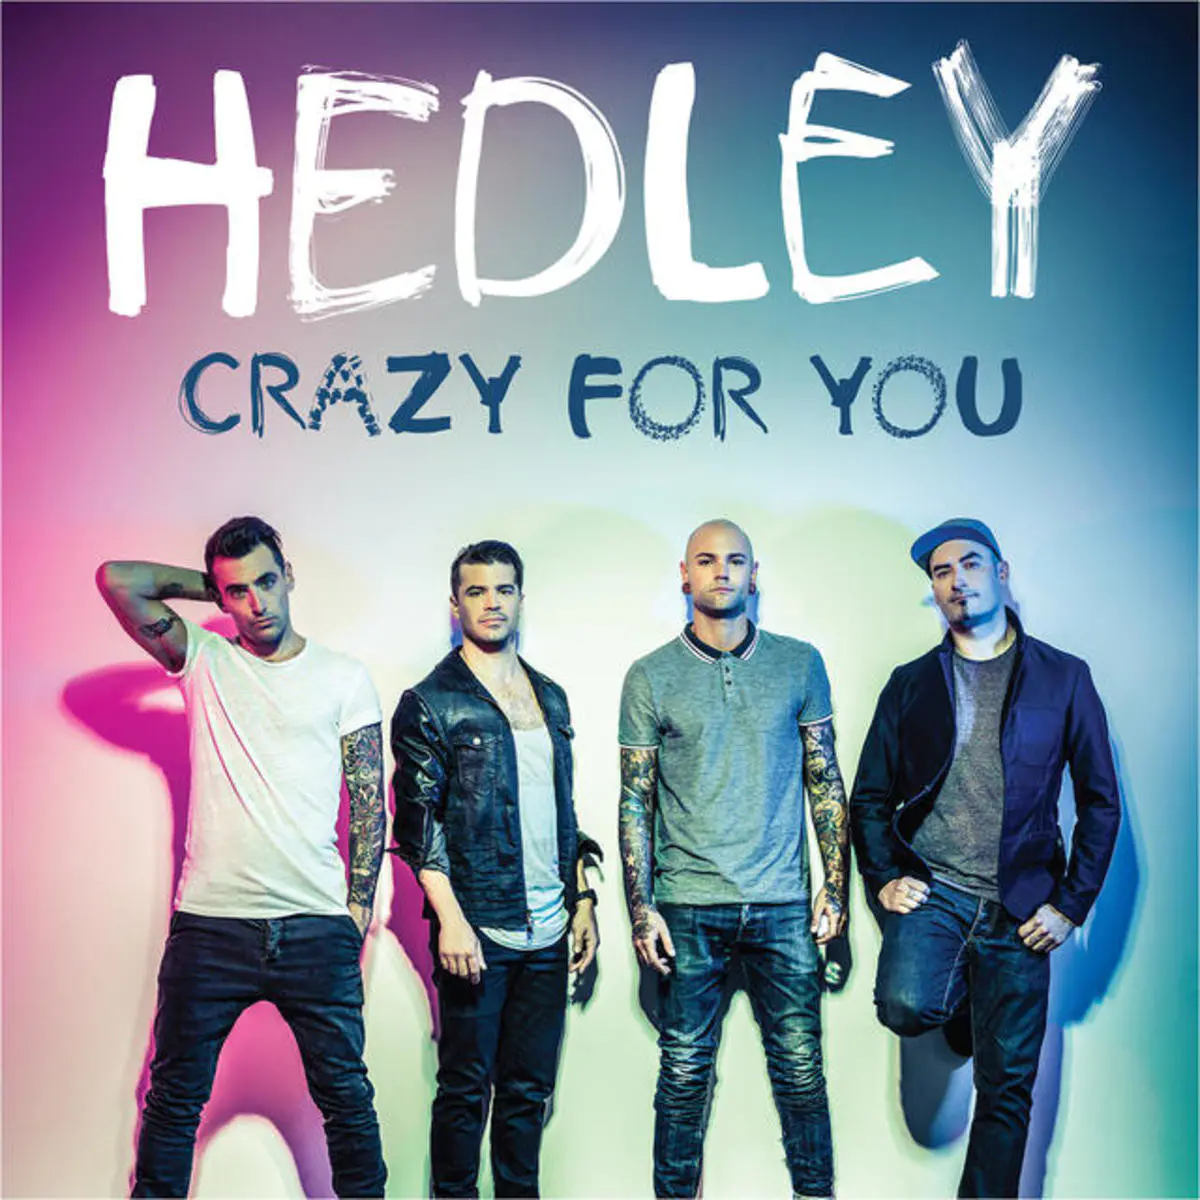 Crazy For You Lyrics In English Crazy For You Explicit Version Crazy For You Song Lyrics In English Free Online On Gaana Com